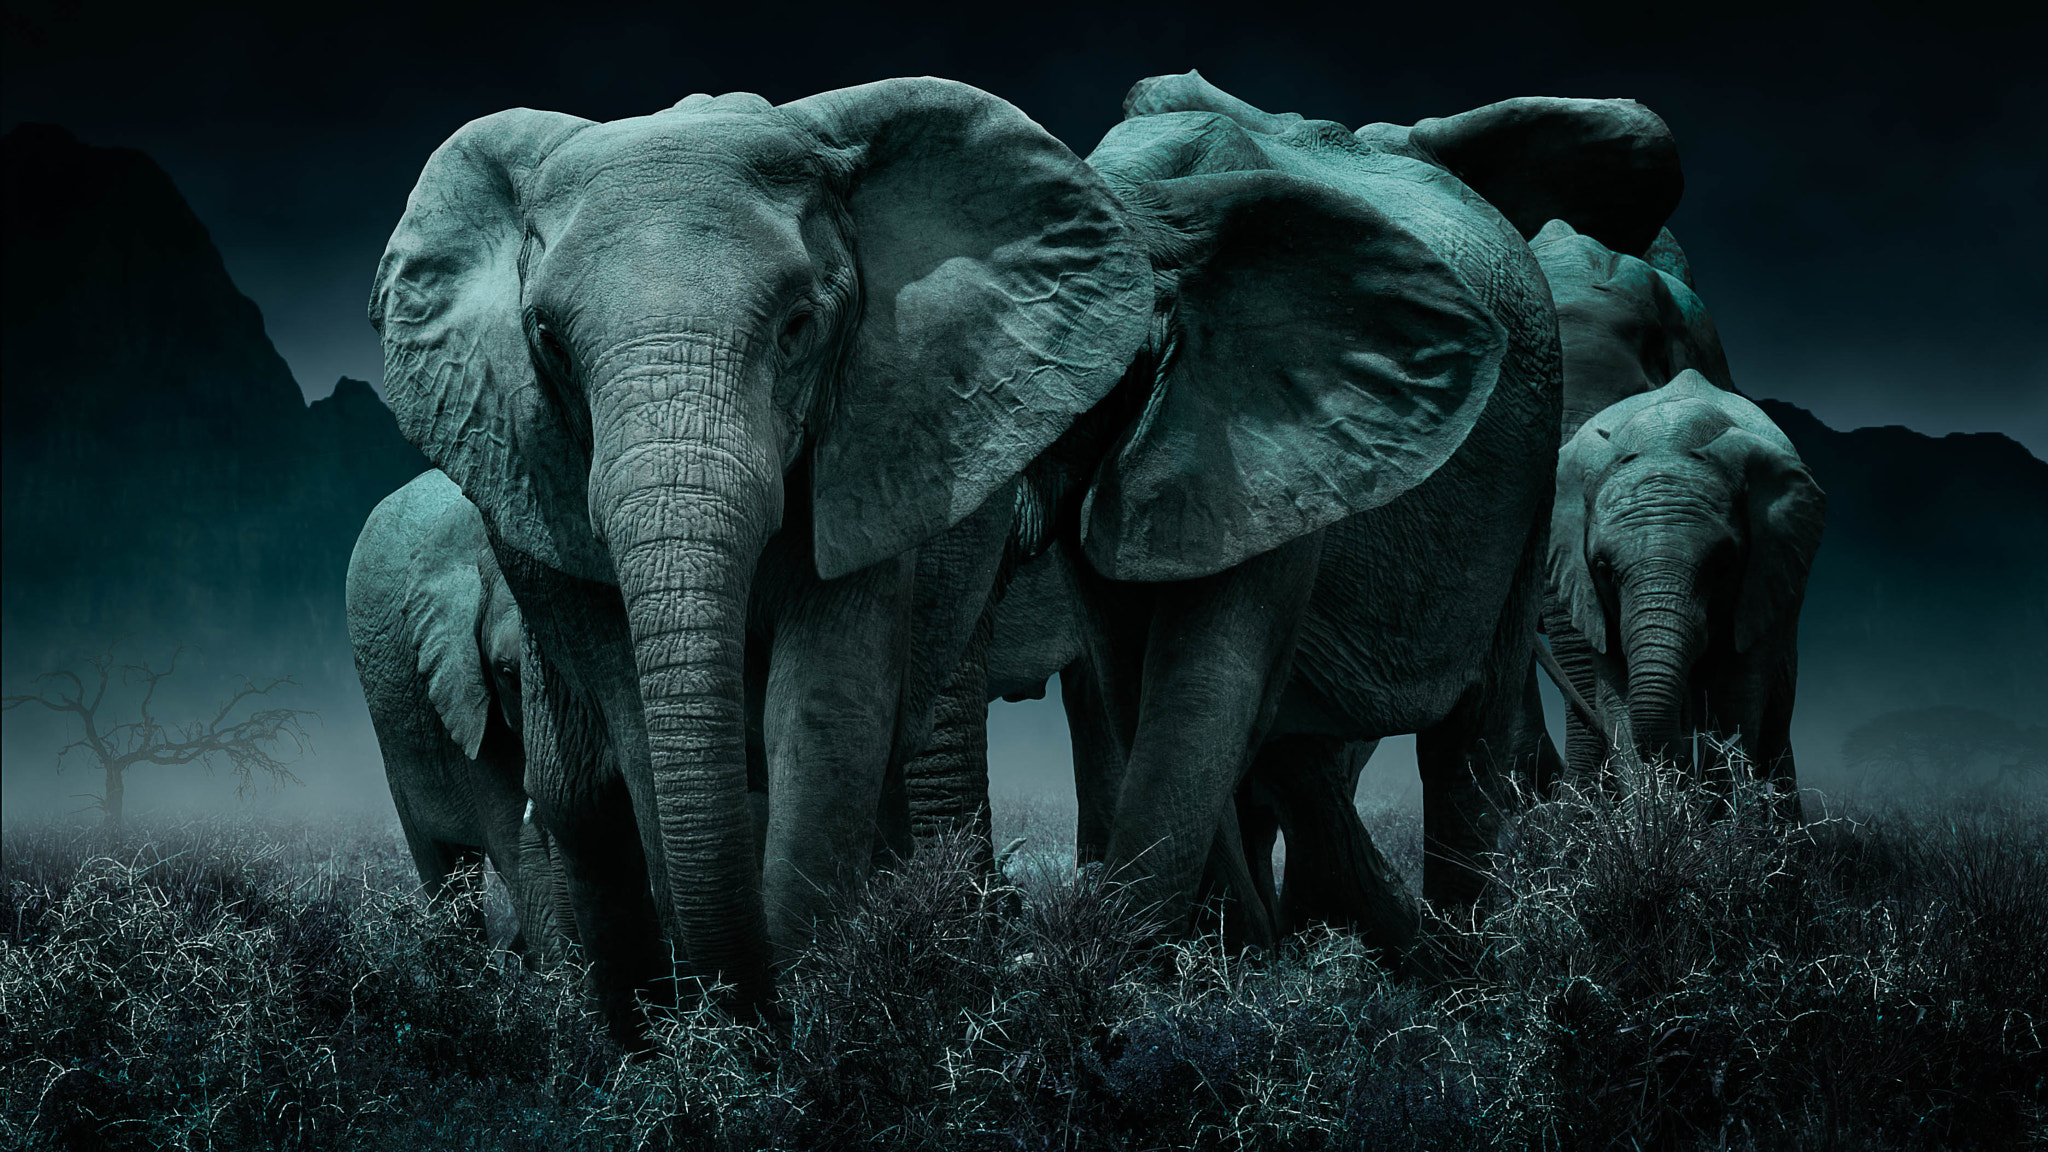 Wallpapers night elephants the herd animals a family of mammals from the squad Robotnik on the desktop